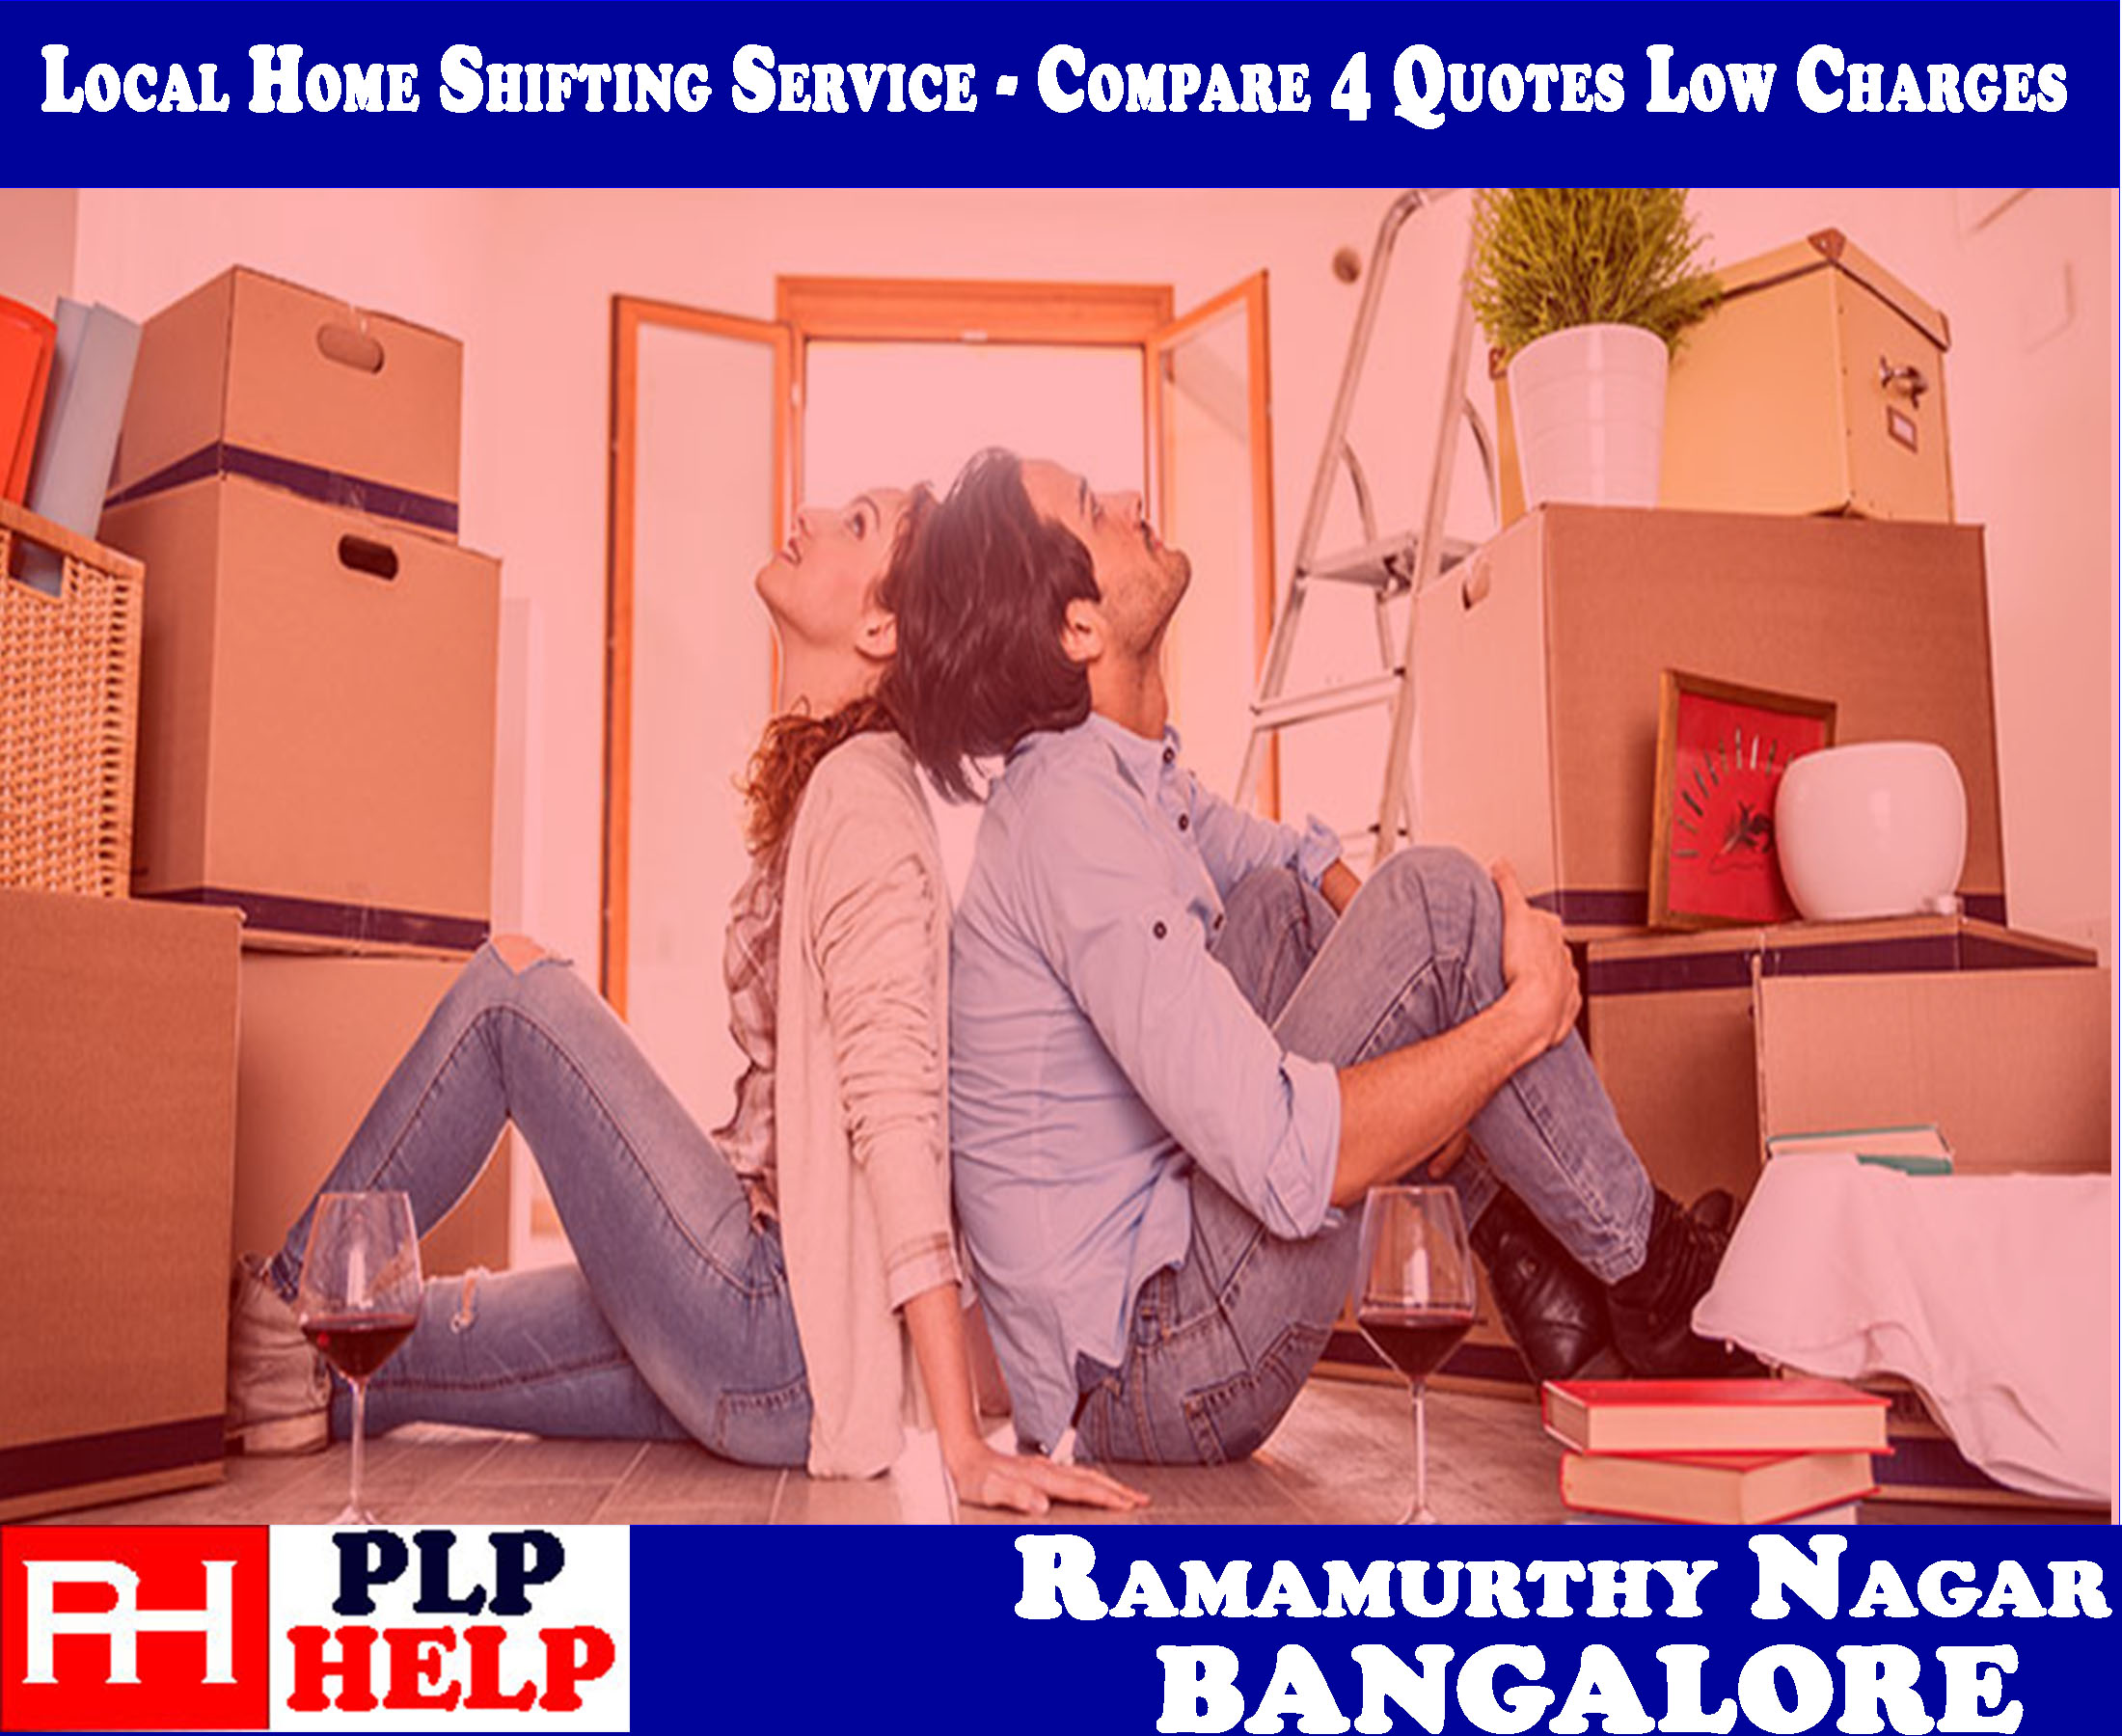 Packers and Movers In Ramamurthy Nagar